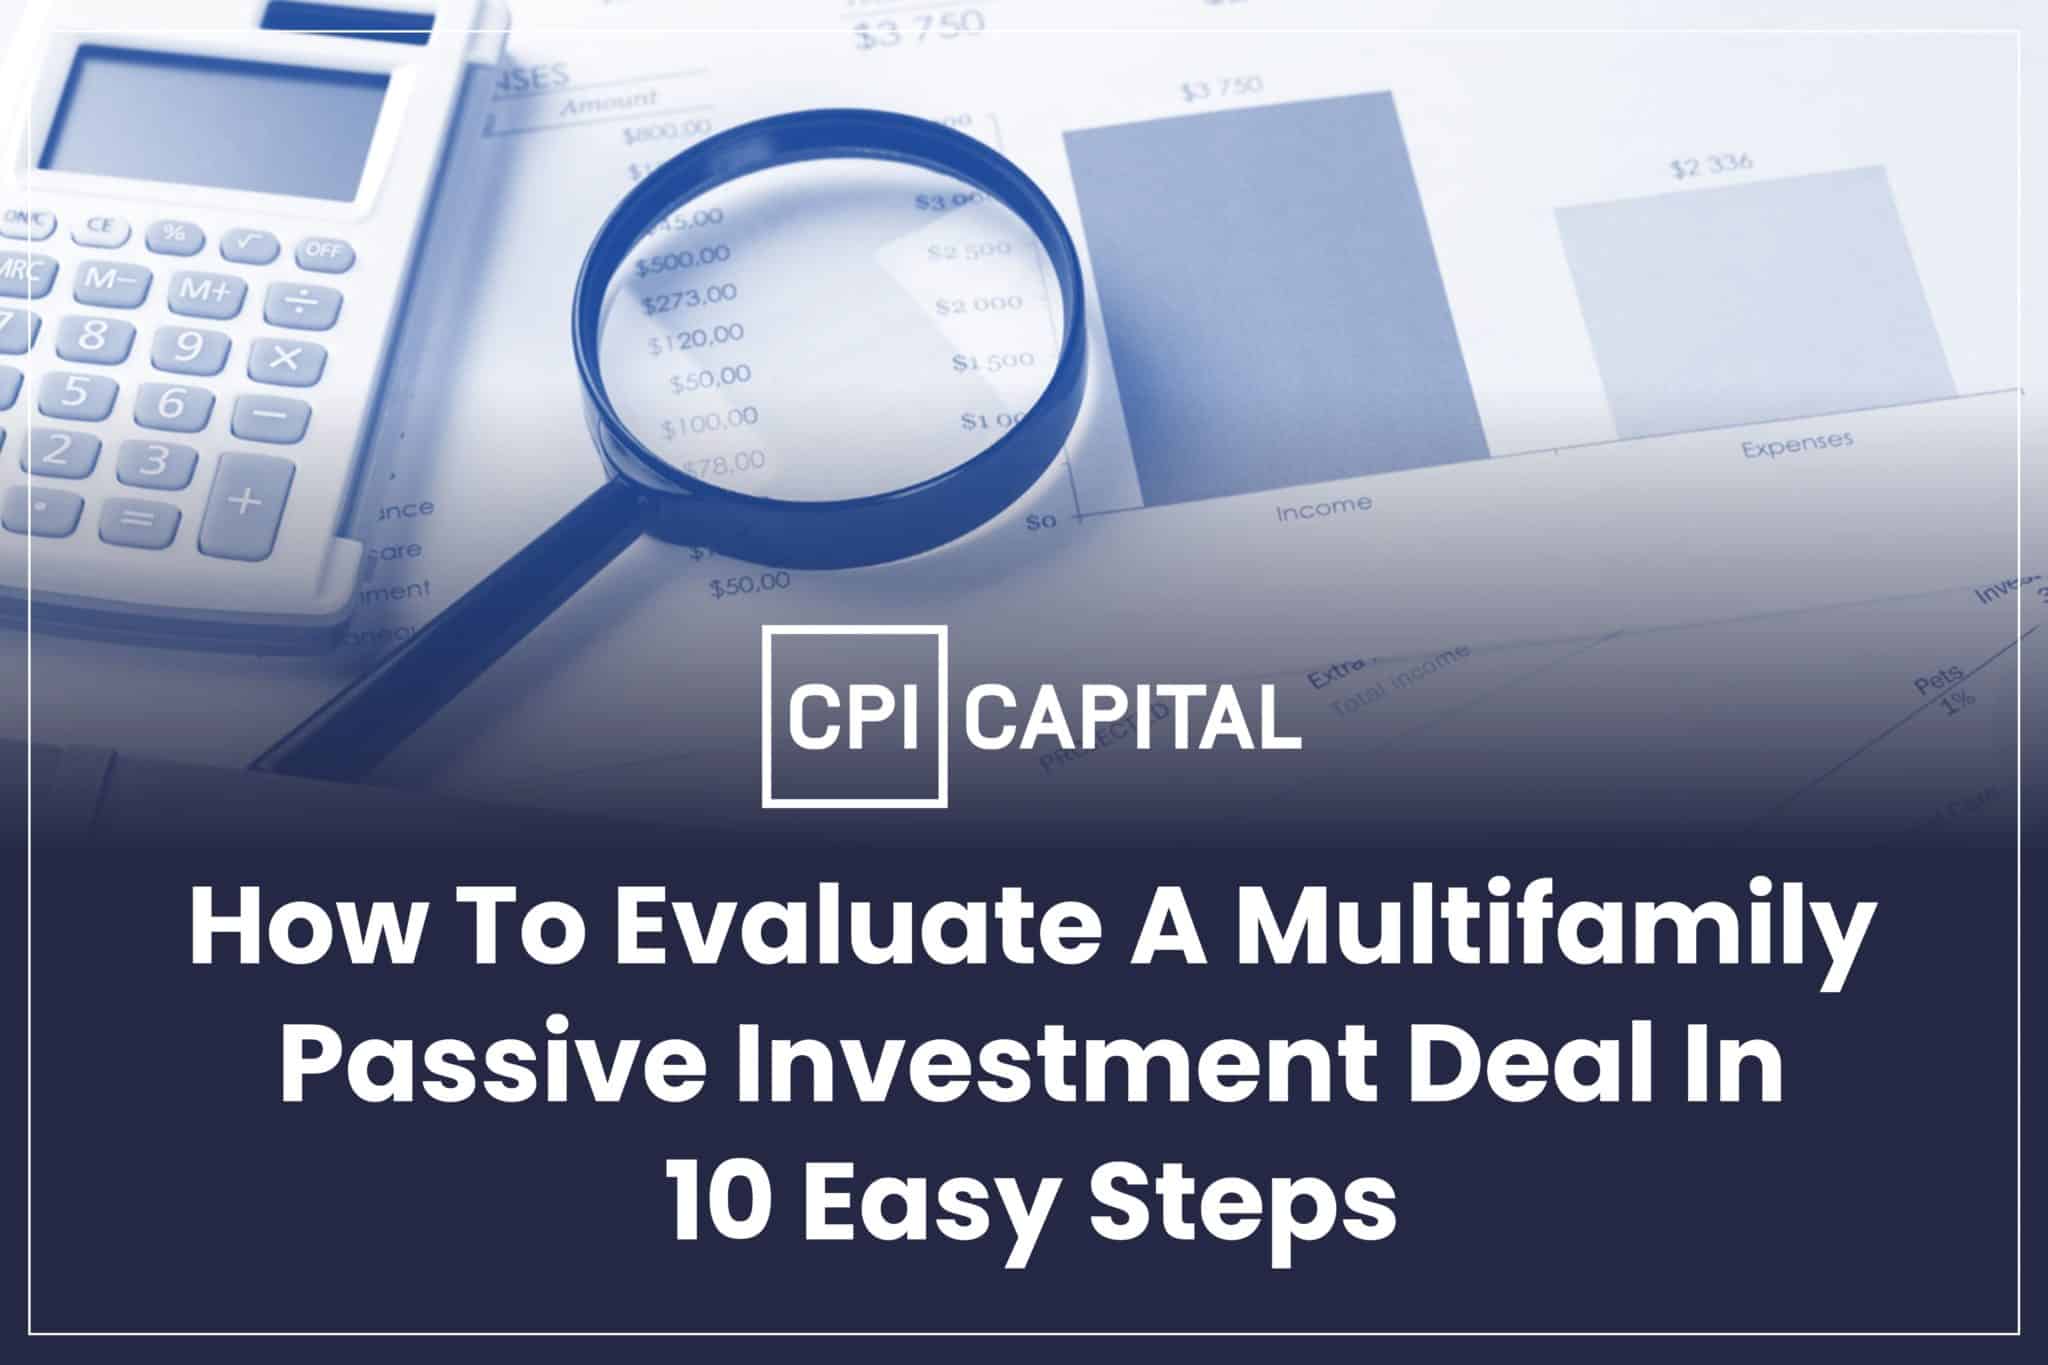 How To Evaluate A Multifamily Passive Investment Deal In 10 Easy Steps